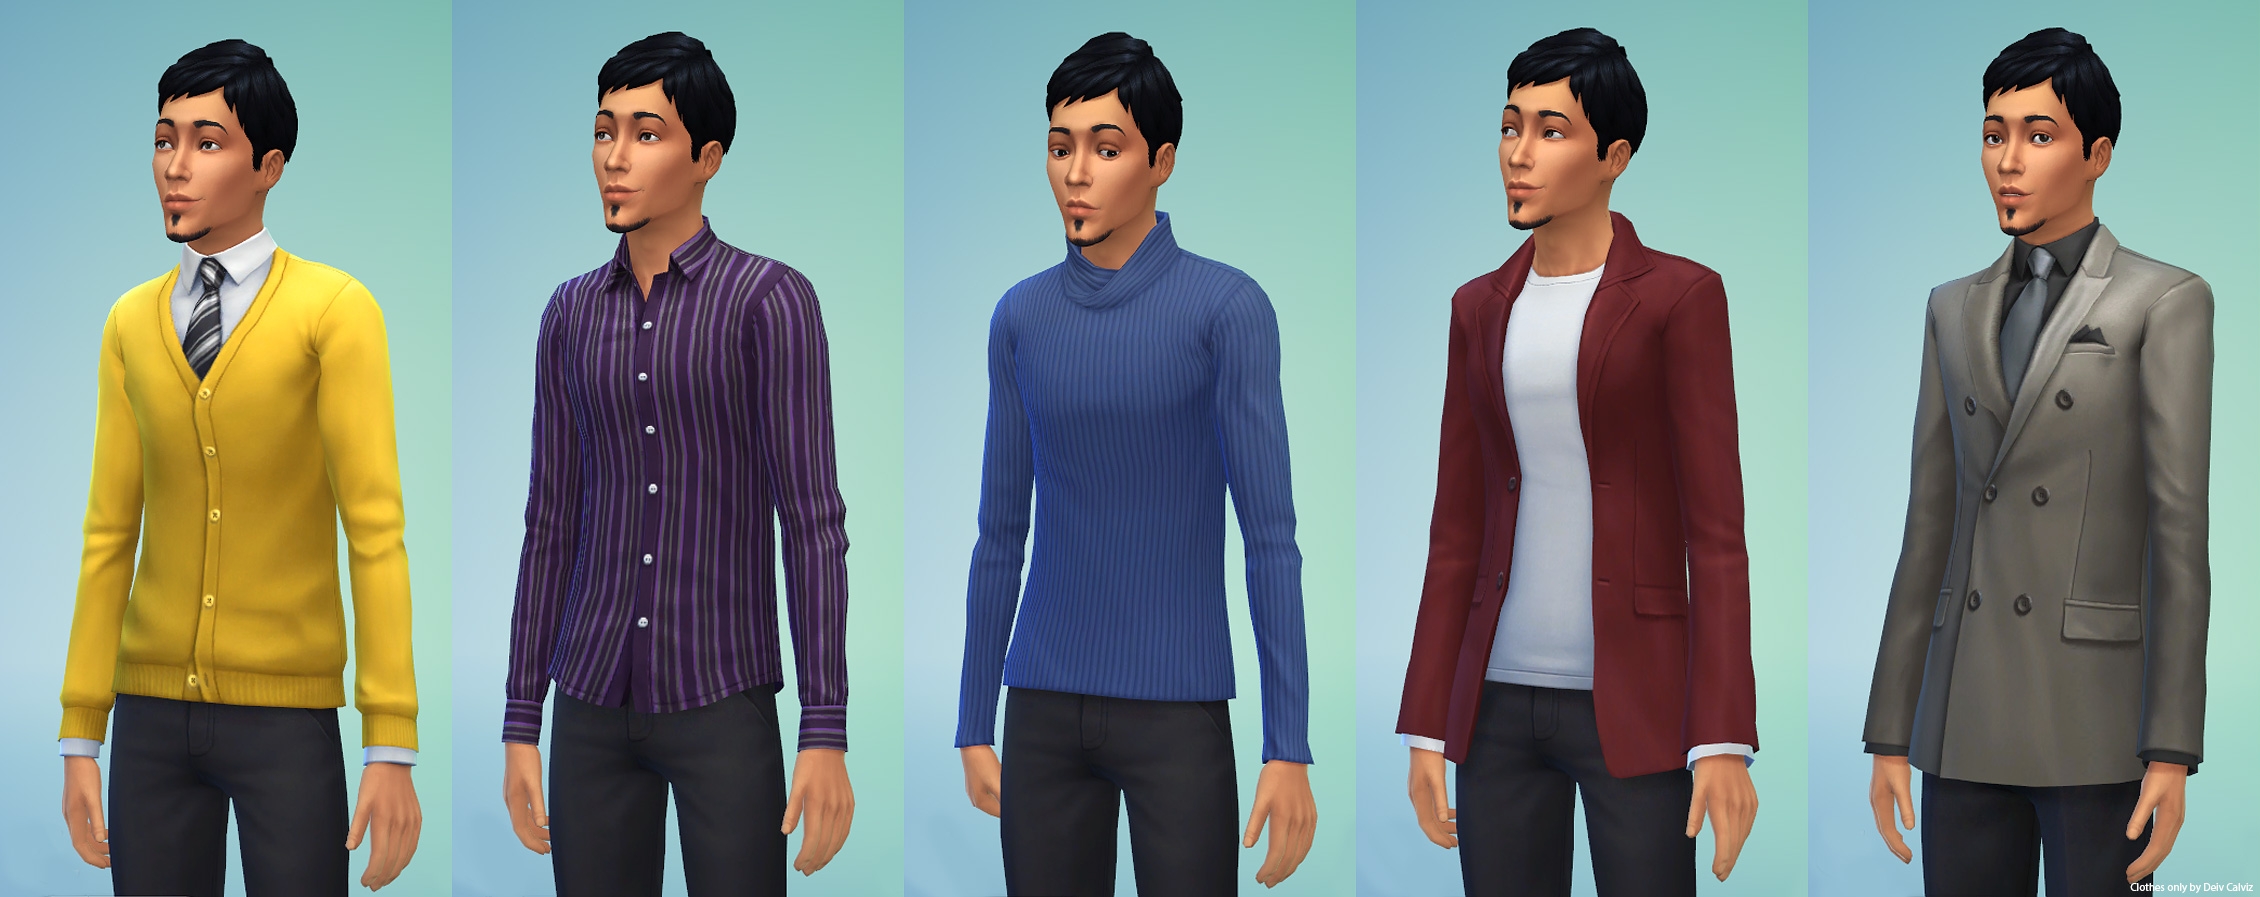 Sims 4 Tops Male